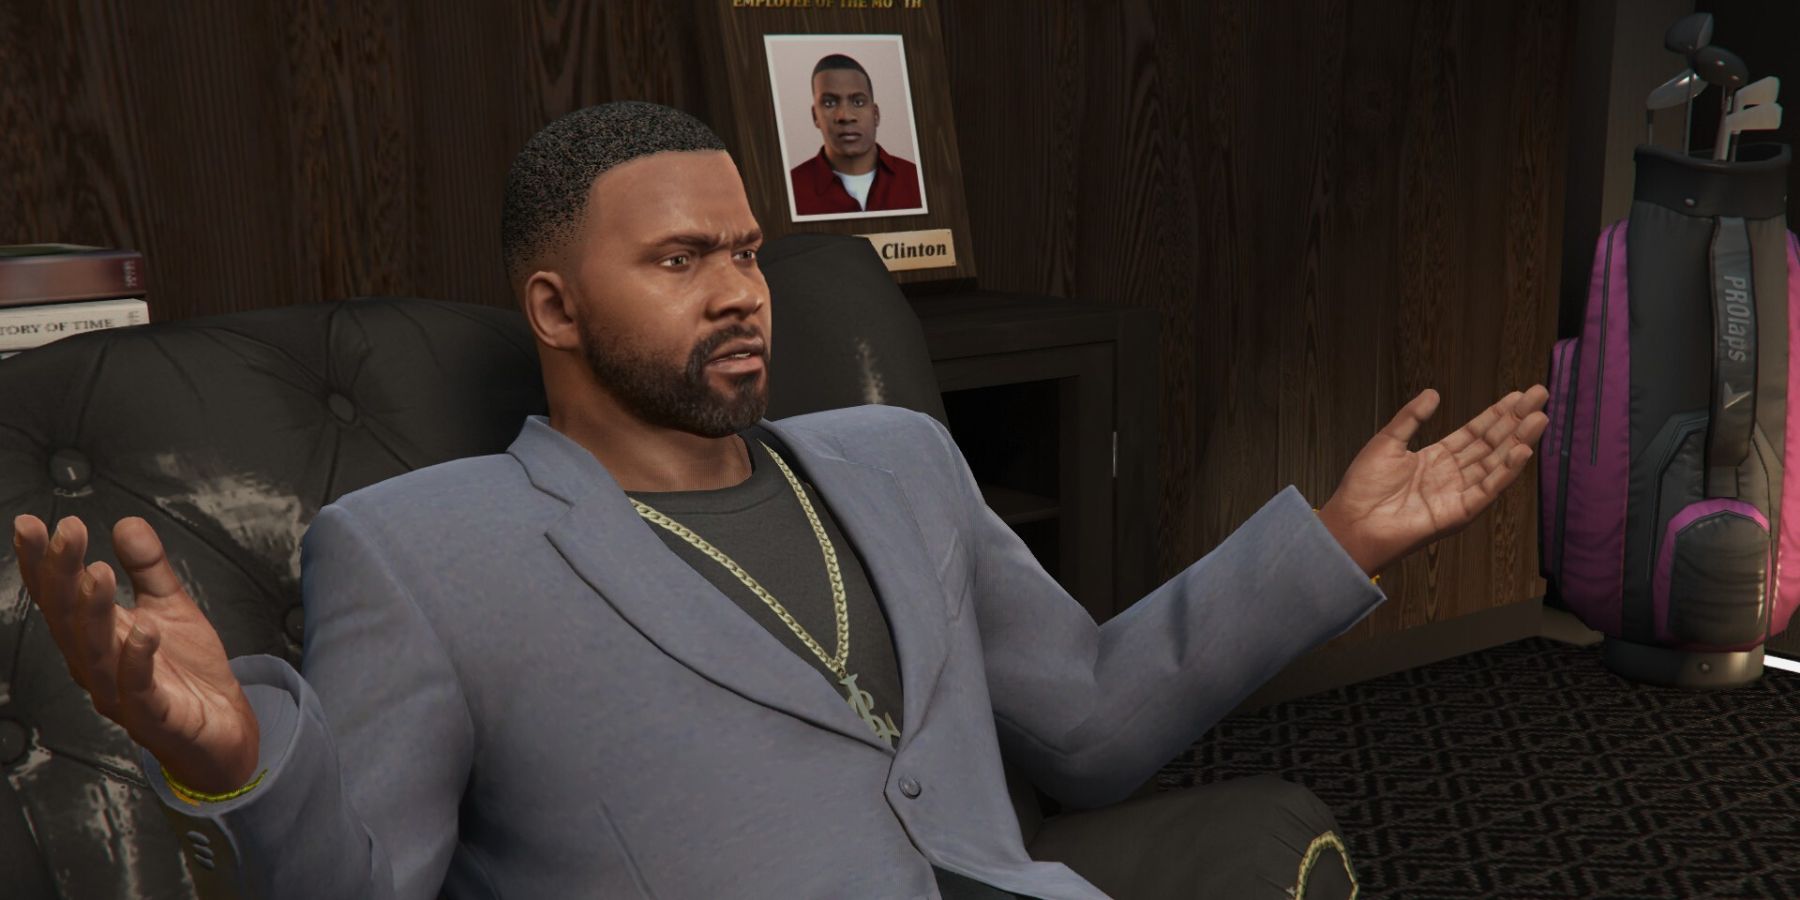 GTA Online Confirms Franklin Looks Weird When Using His Special